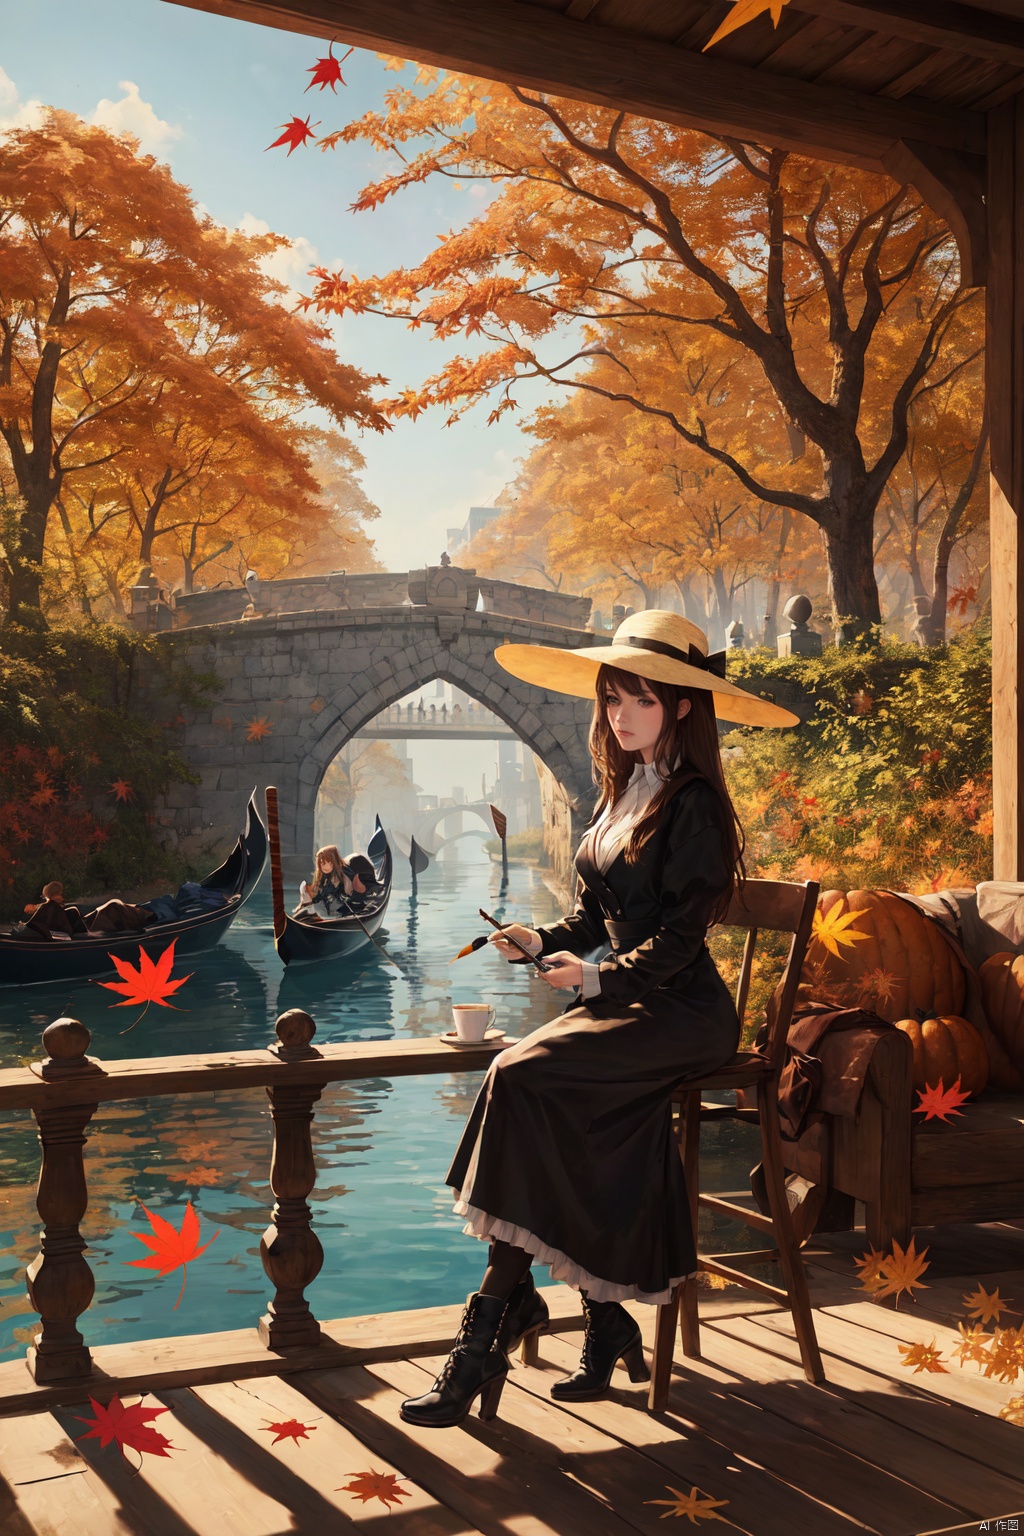 urban street scenery,Gothic architecture,Castle,Canal,Boat,Venice,Girl in a sunhat,Coffee table,A girl sits on a wooden chair,painter,equipment,paintbrush,drawing board,Coffee cup,Long hair,Brown hair,painting,sketch,Autumn,Autumn scenery,Fallen leaves,Sycamore leaves on the surface of the water,tourist,Dusk,(autumn maple forest:1.3),(very few fallen leaves),(path),arch bridge,(europeanizing architecture:1.2),masterpiece,best quality,highly detailed,Amazing,finely detail,extremely detailed CG unity 8k wallpaper,score:>=60,incredibly absurdres,wallpaper,realistic,real,photo,landscape,foreshortening,beautiful detailed eyes,Fine hair texture,fox,animal,squirrel,acorn,